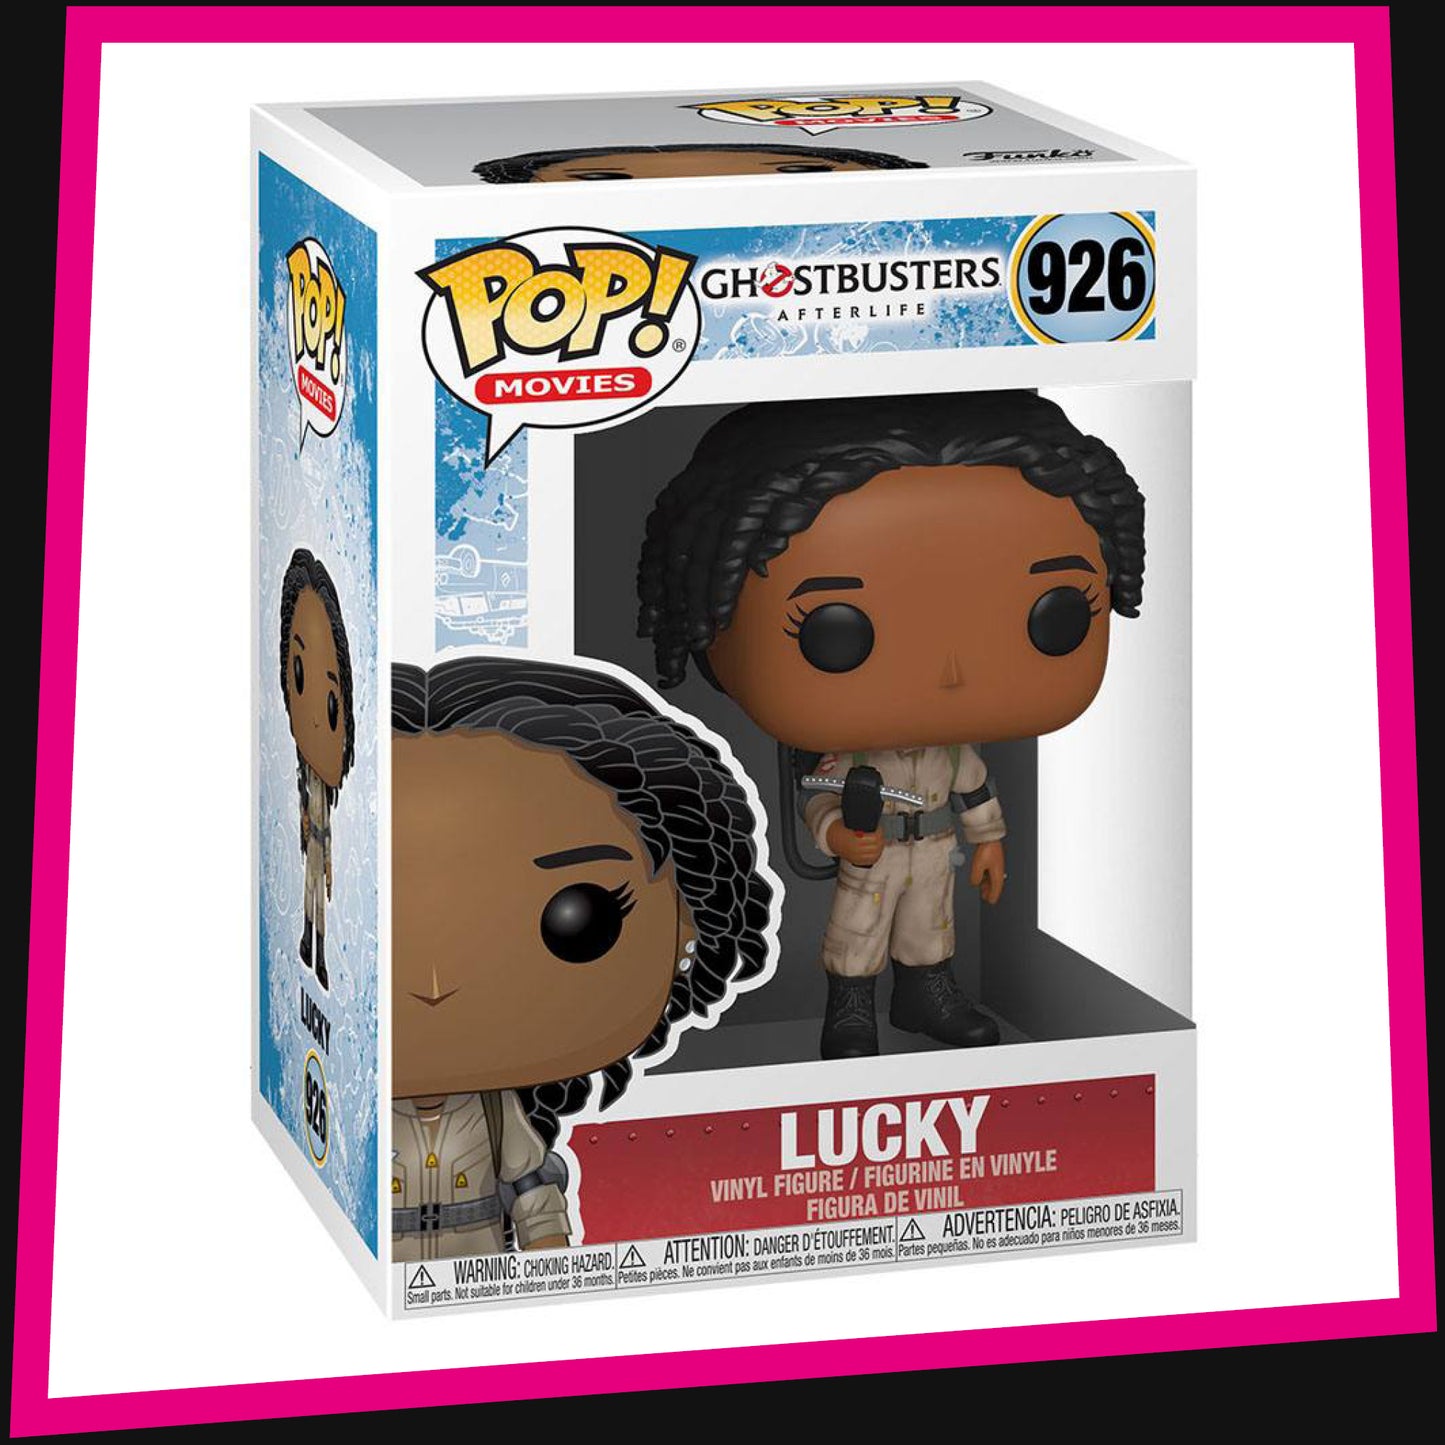 Lucky - Ghostbusters: Afterlife #926 Funko POP! Movies 3.75"